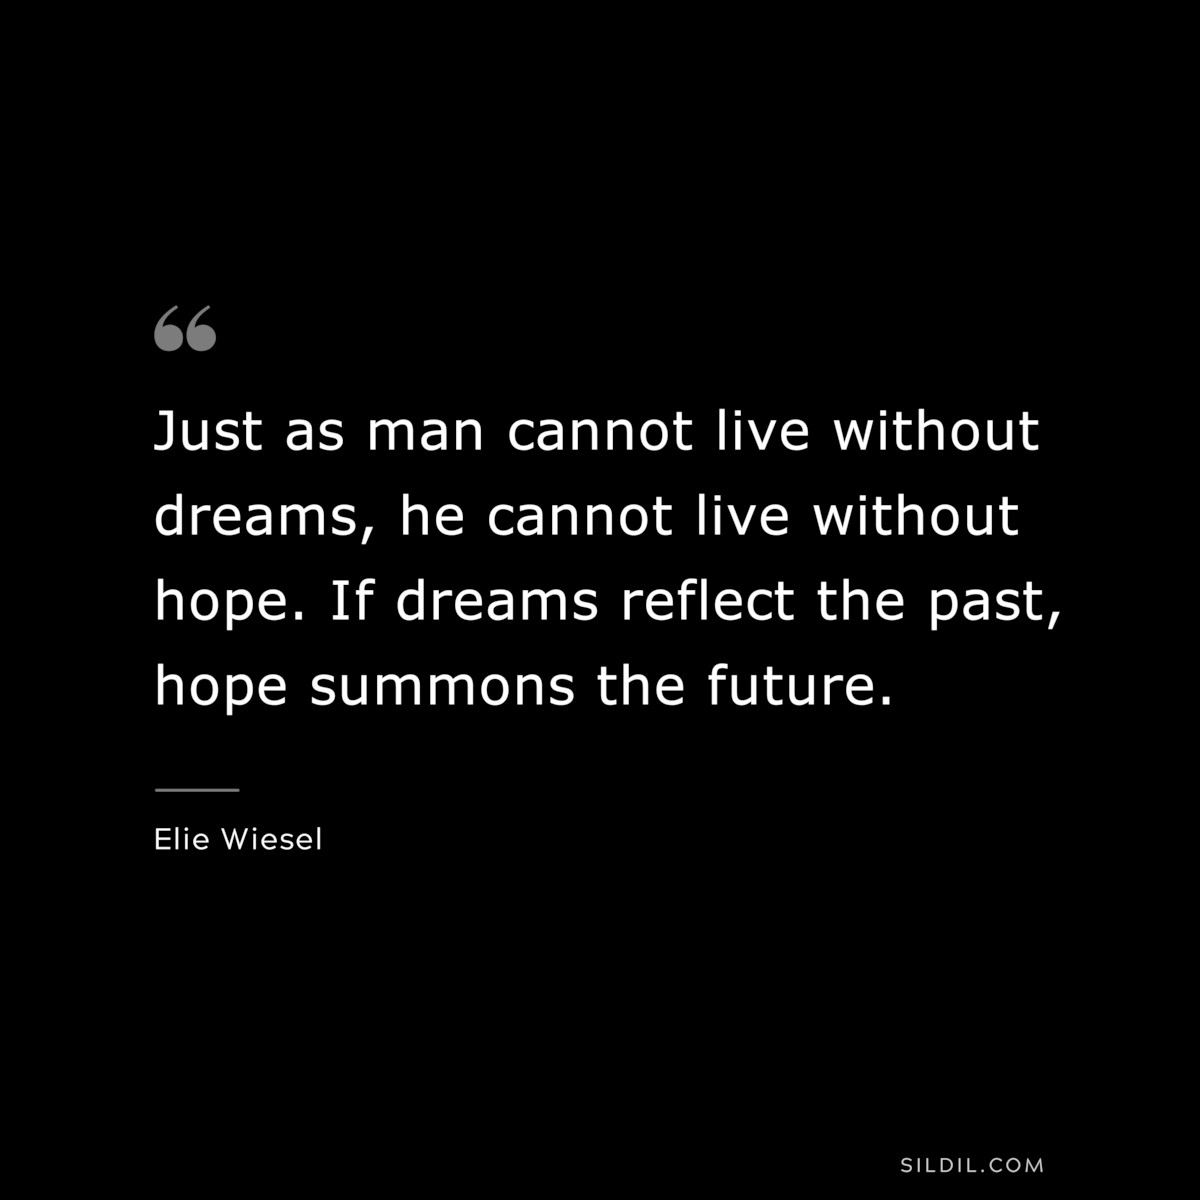 Just as man cannot live without dreams, he cannot live without hope. If dreams reflect the past, hope summons the future. ― Elie Wiesel